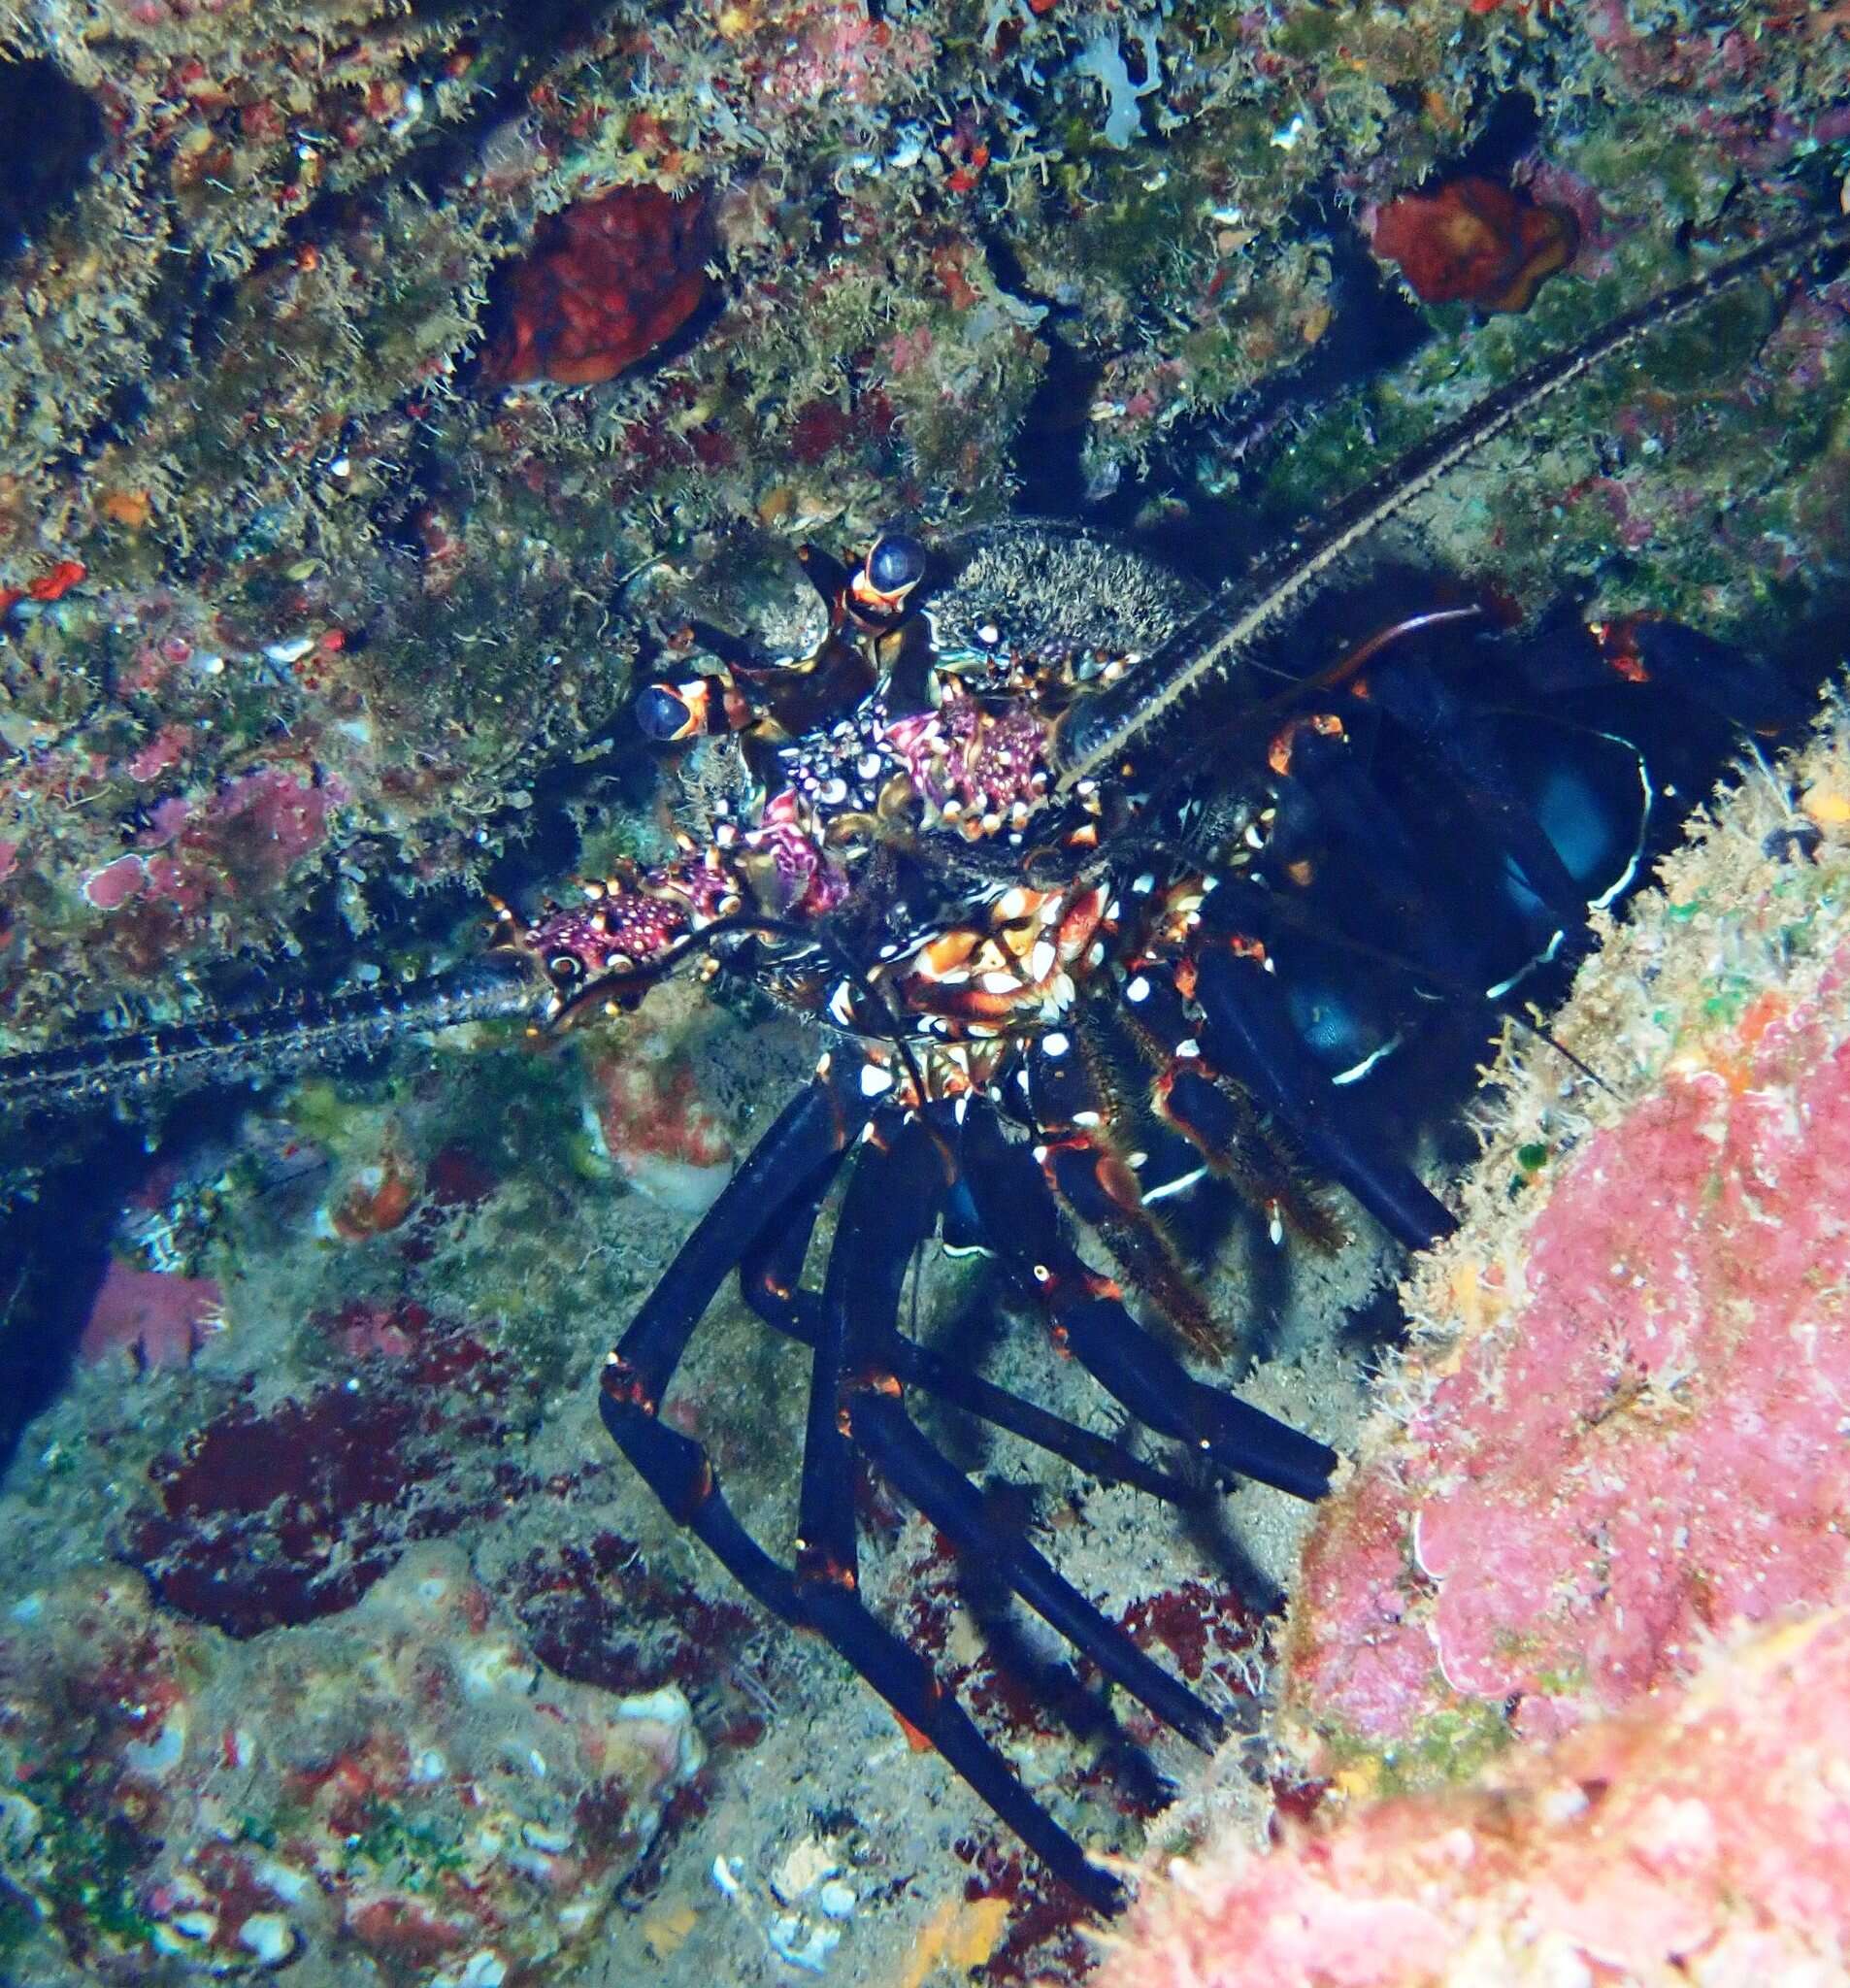 Image of Banded Spiny Lobster